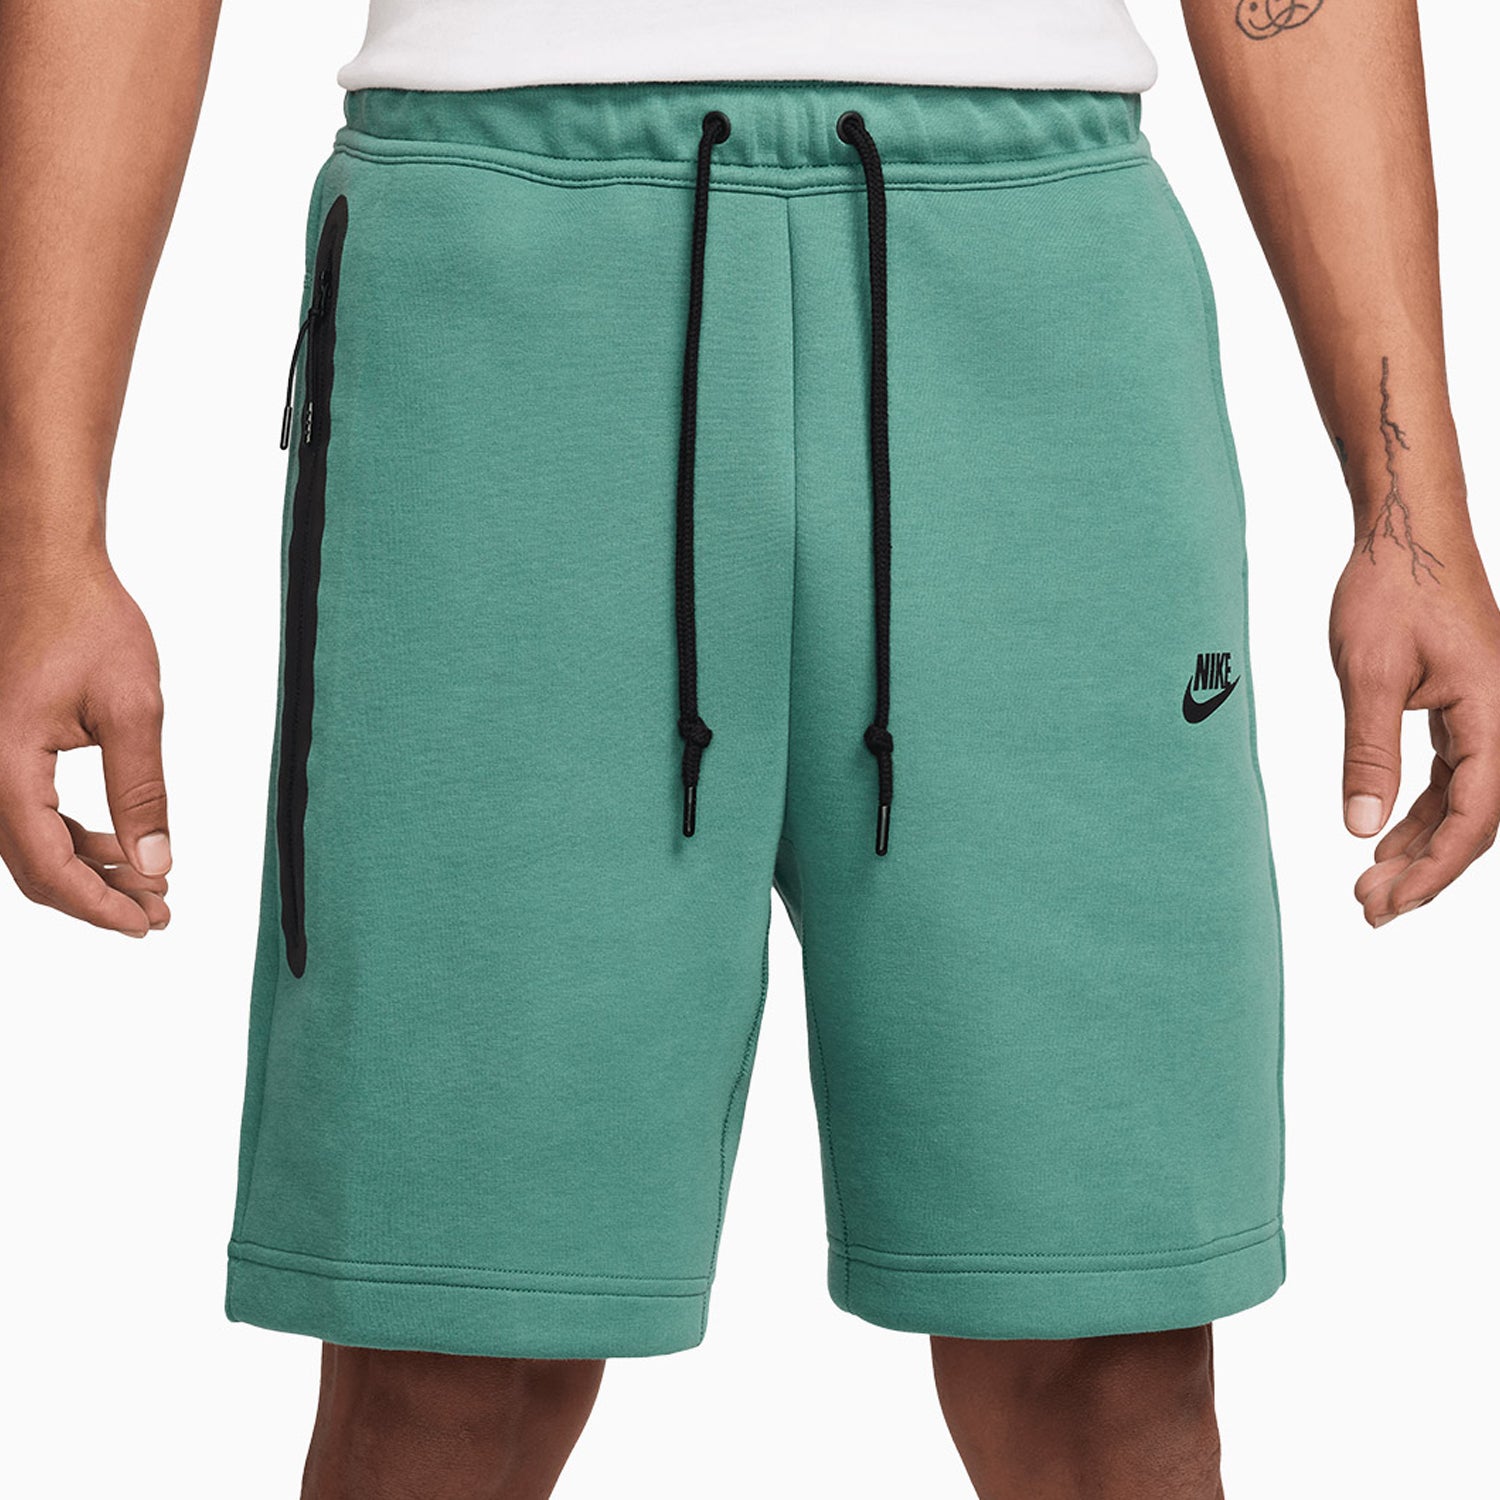 Men's Sportswear T-Shirt And Shorts Outfit